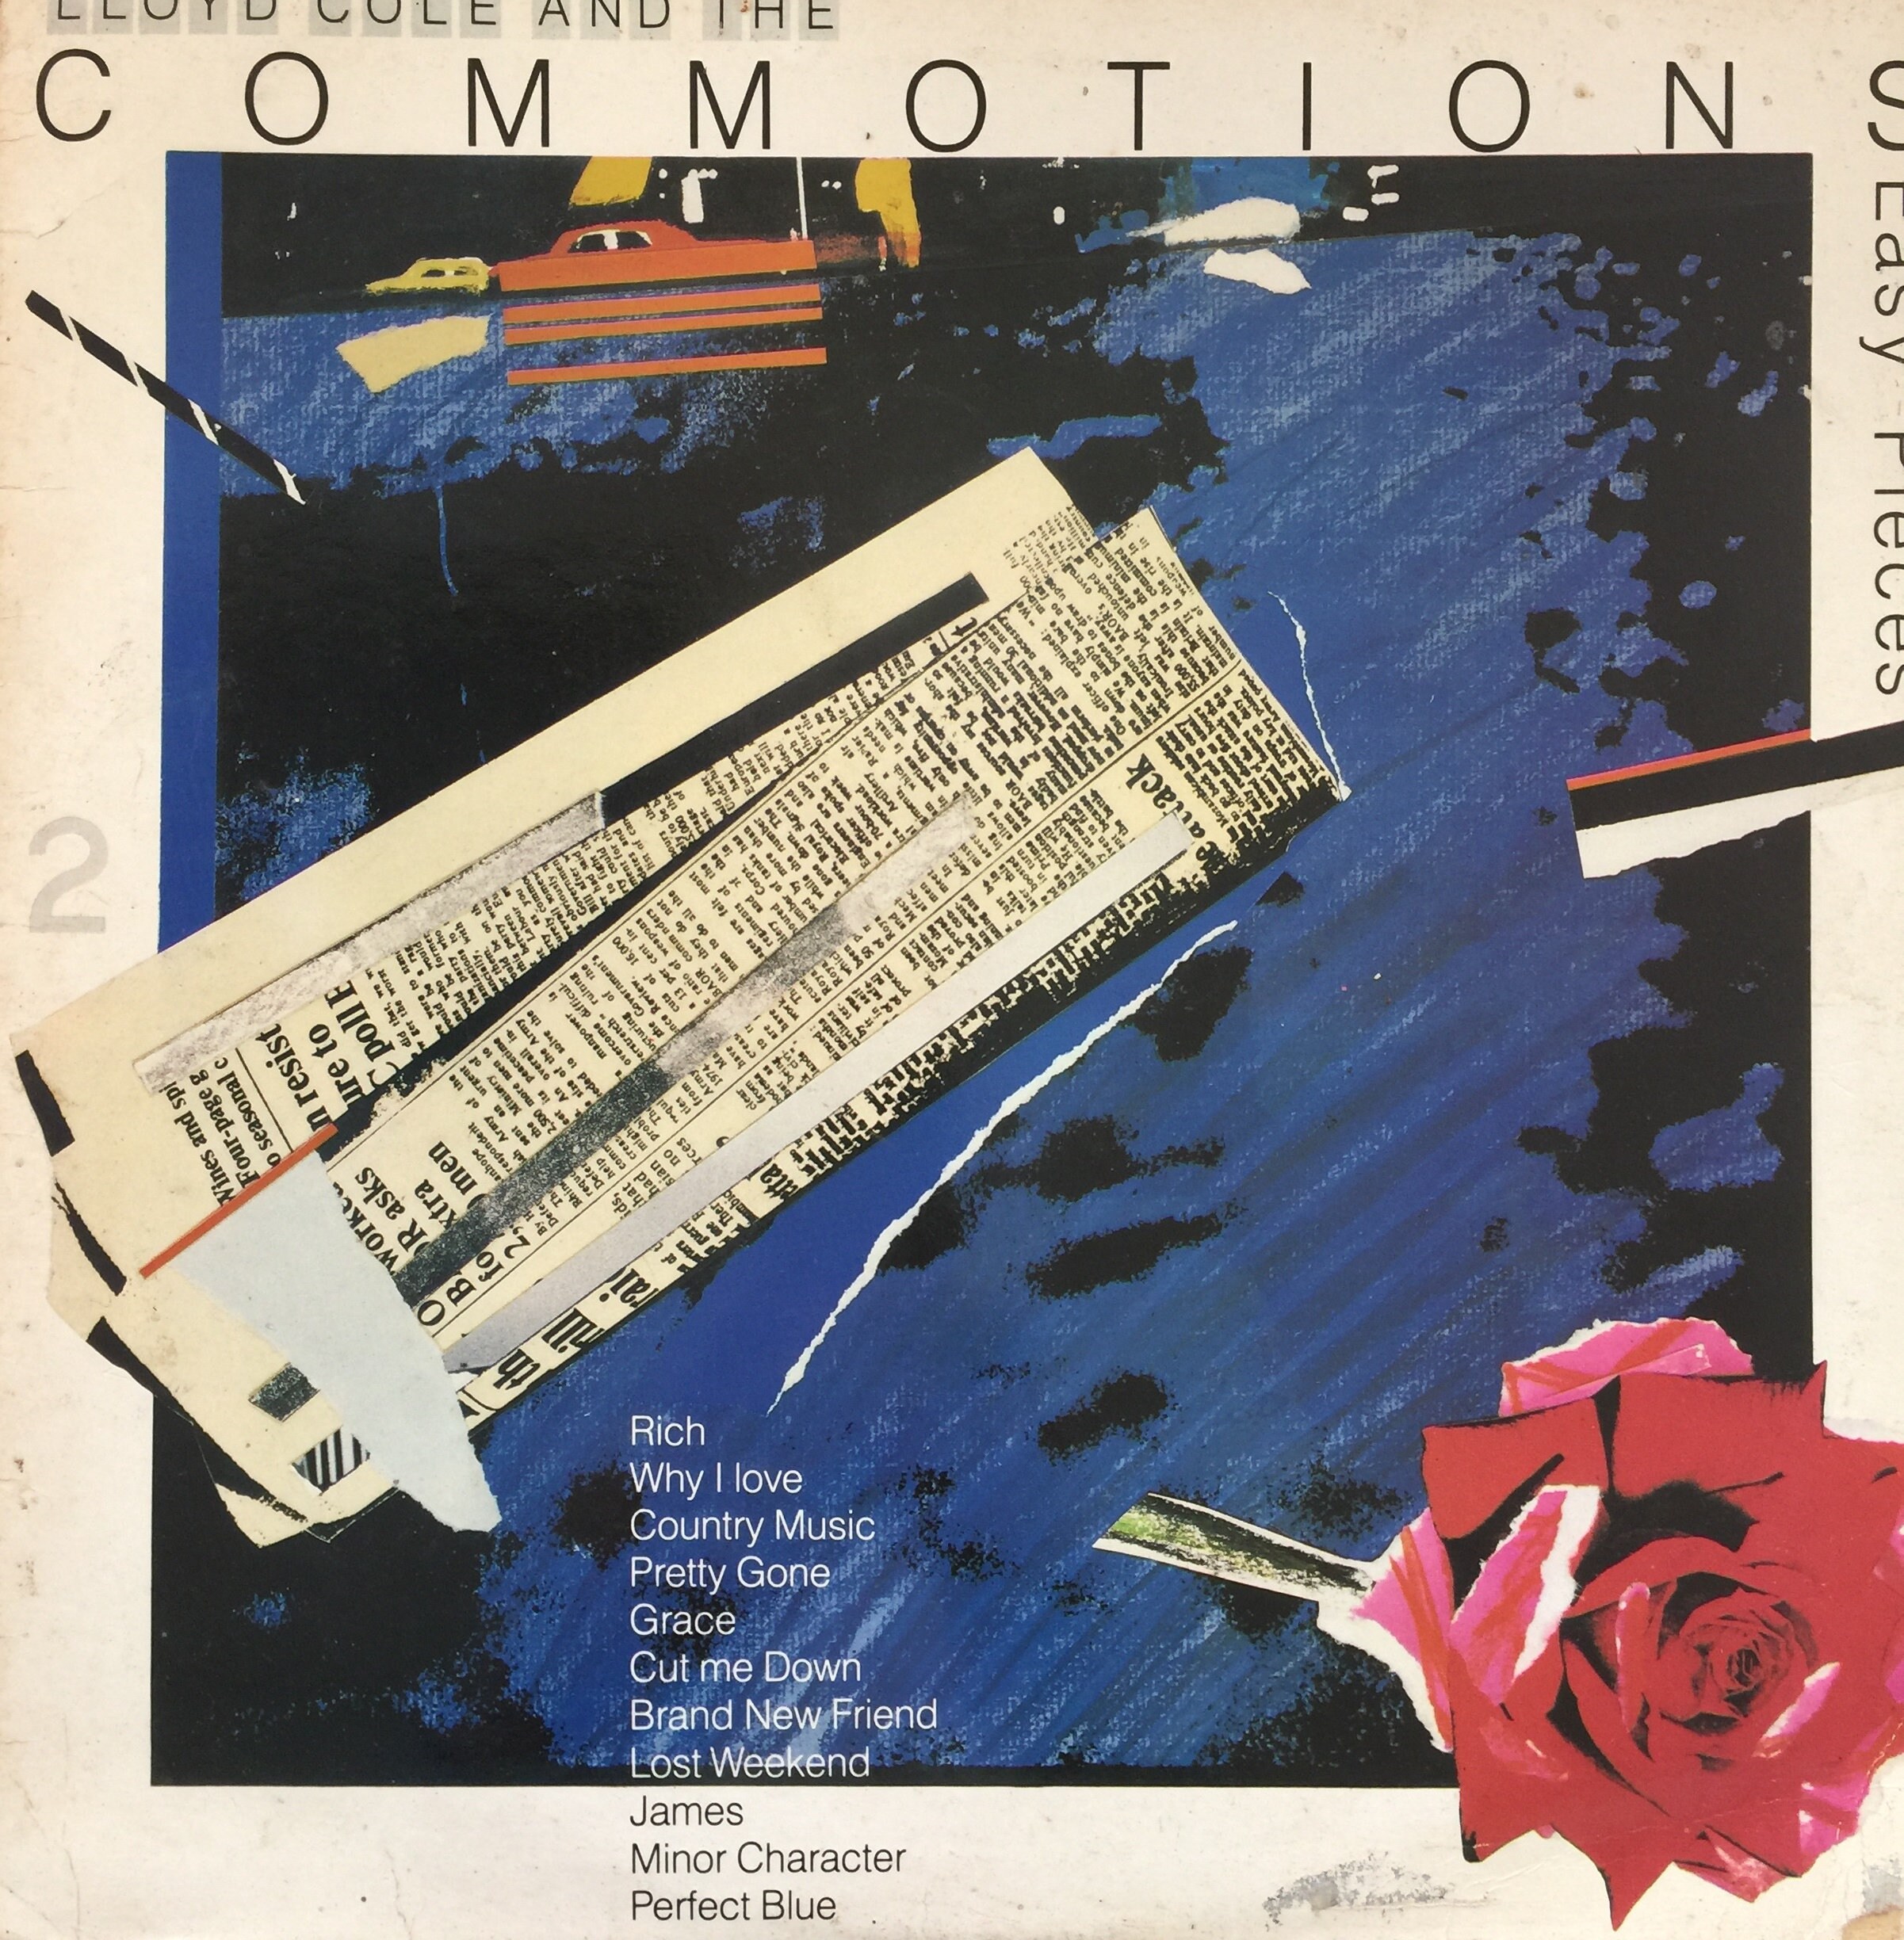 Lloyd Cole and the Commotions, Easy Pieces / vinyle -  France